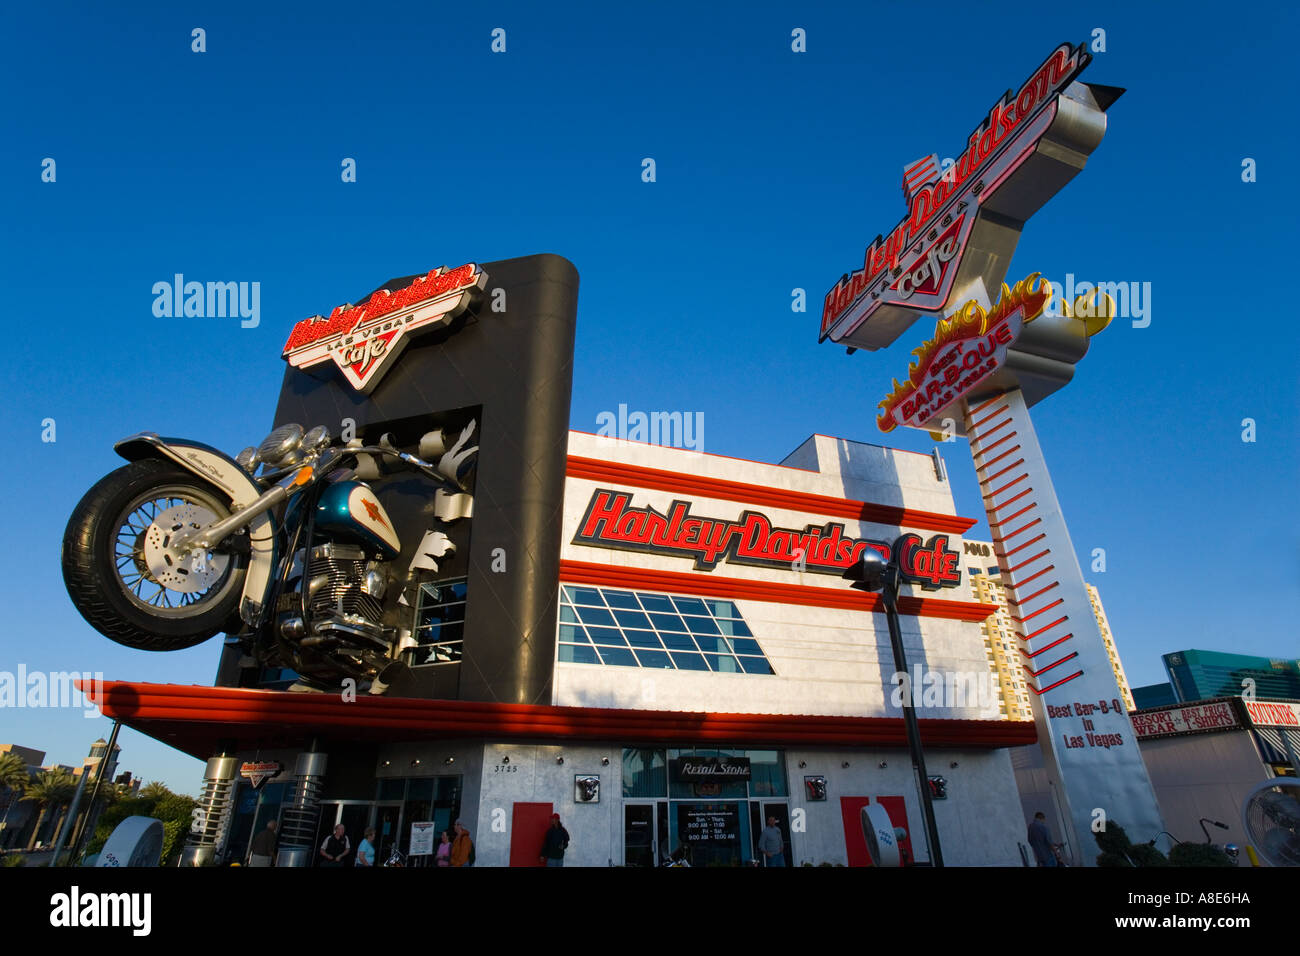 Las Vegas" - "Harley Davidson" Cafe on the "Strip" with eye catching  signage and exhibits Stock Photo - Alamy